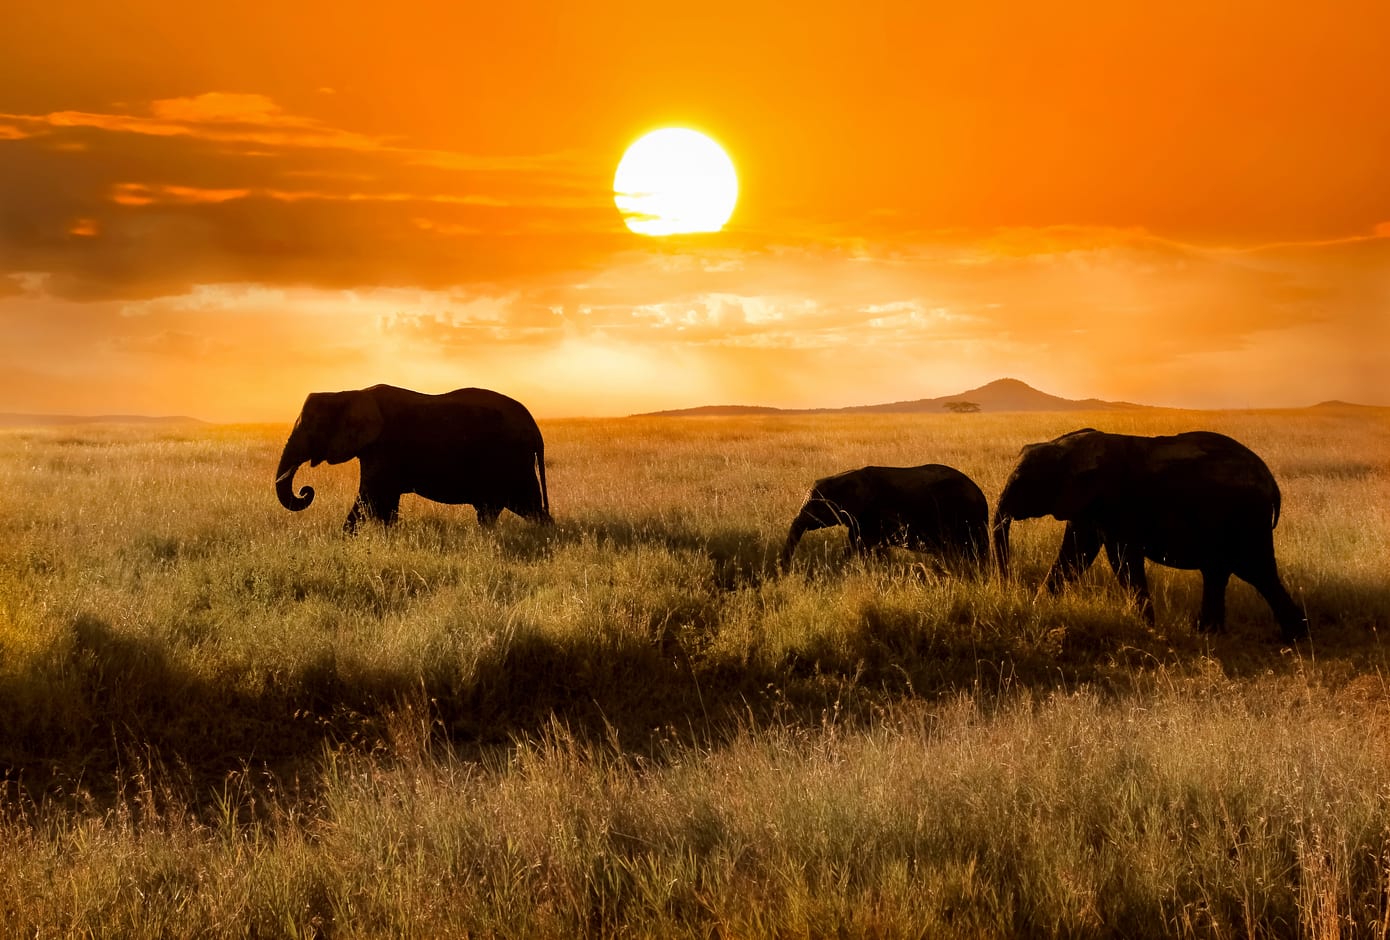 Three elephants during an orange sunset at the Serengueti National Park, in Tanzania, Africa.